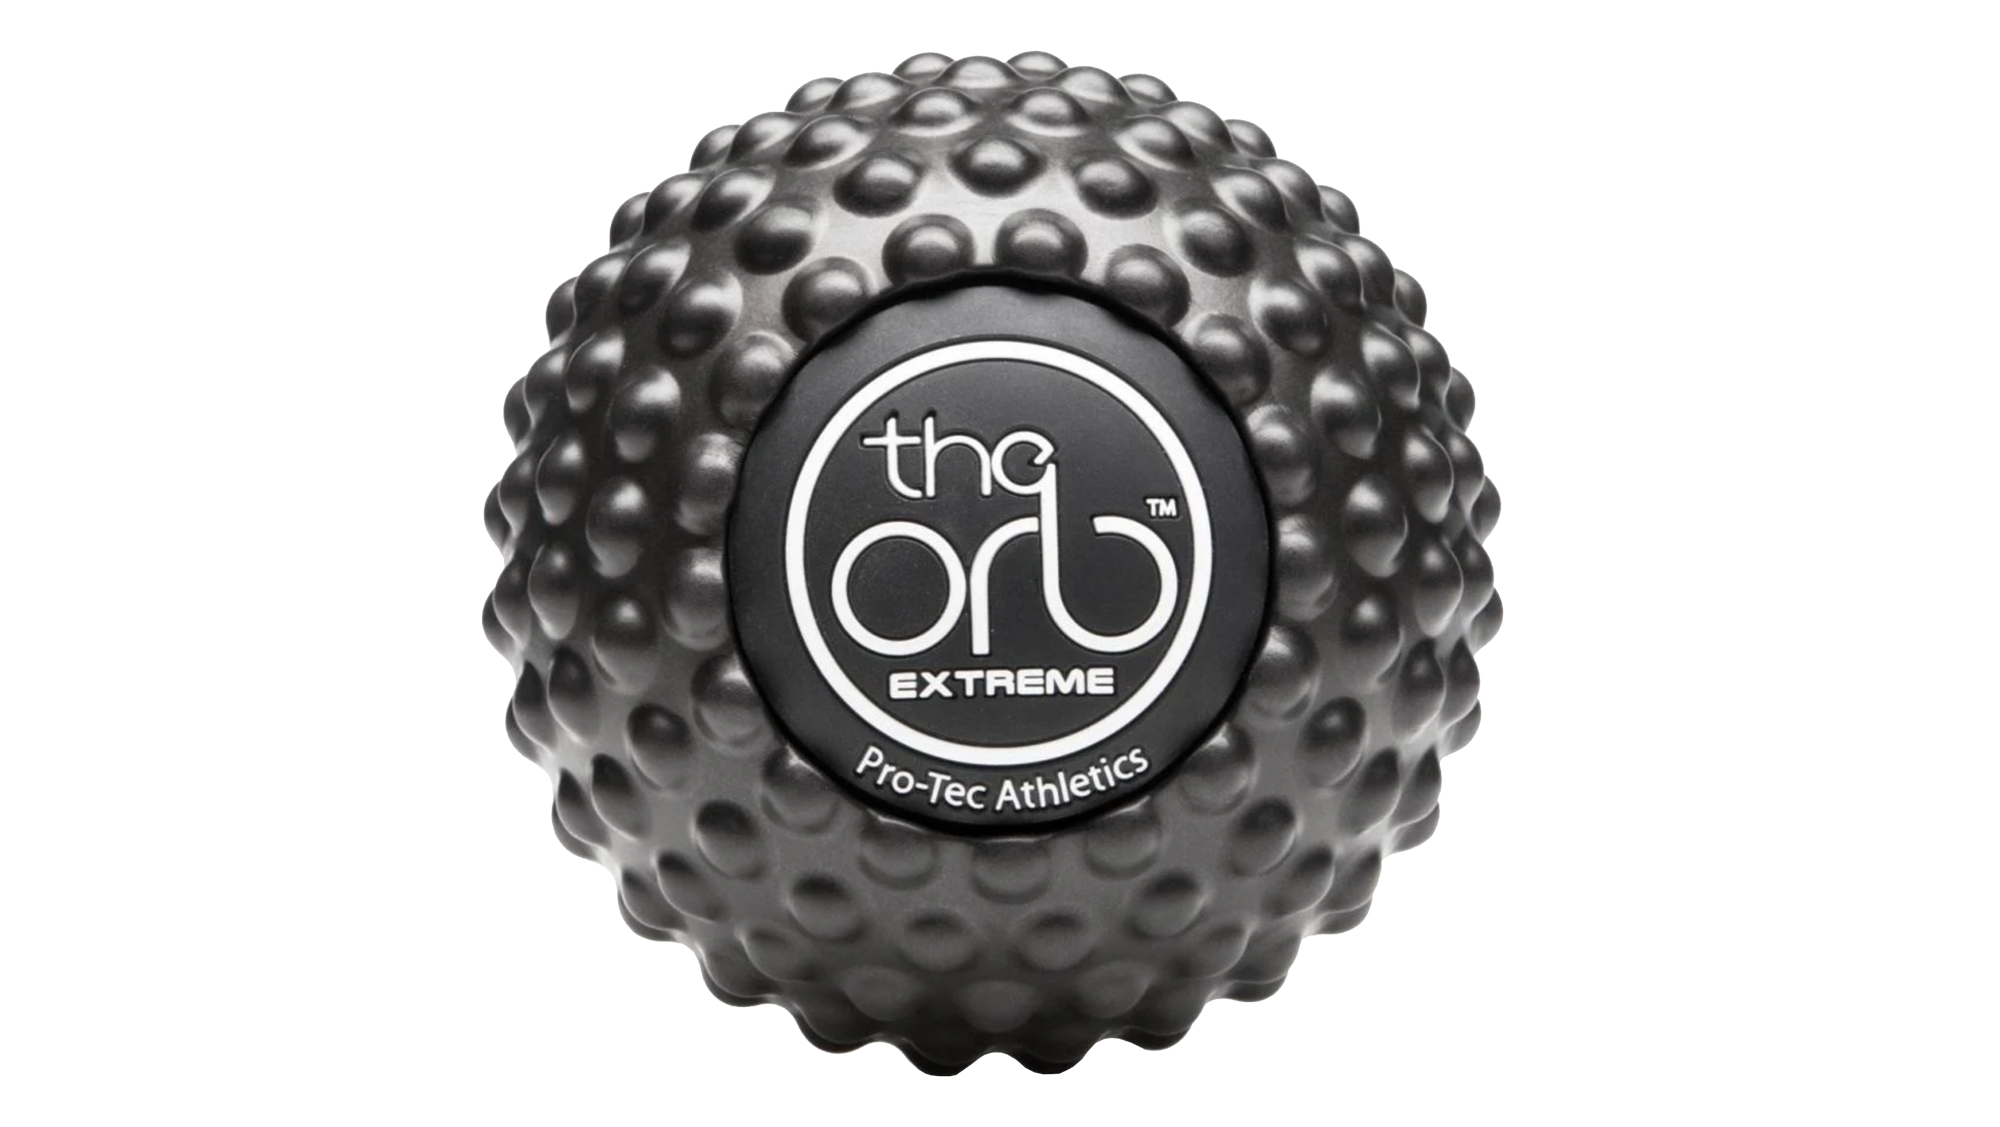 The ORB Extreme